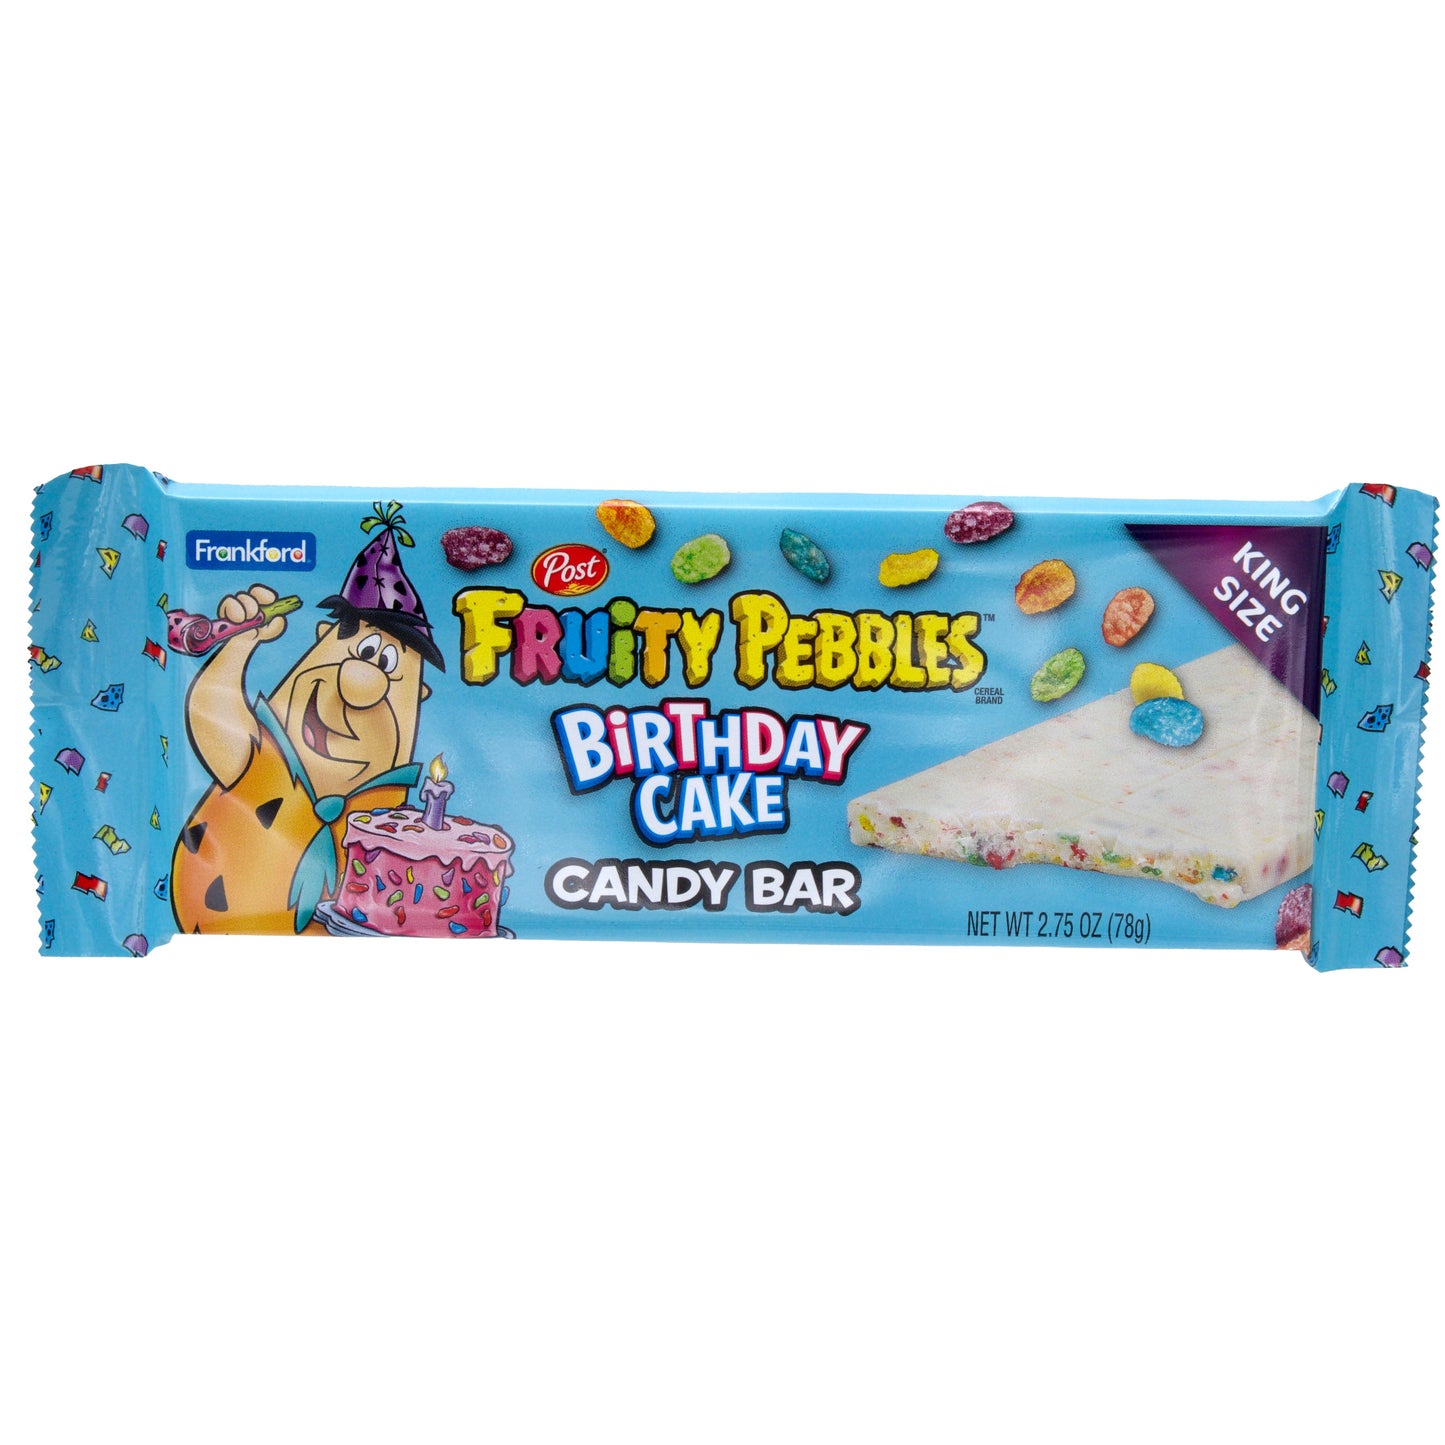 Light blue candy bar wrapper with fruity pebbles and Fred Flinstone with pink birthday cake